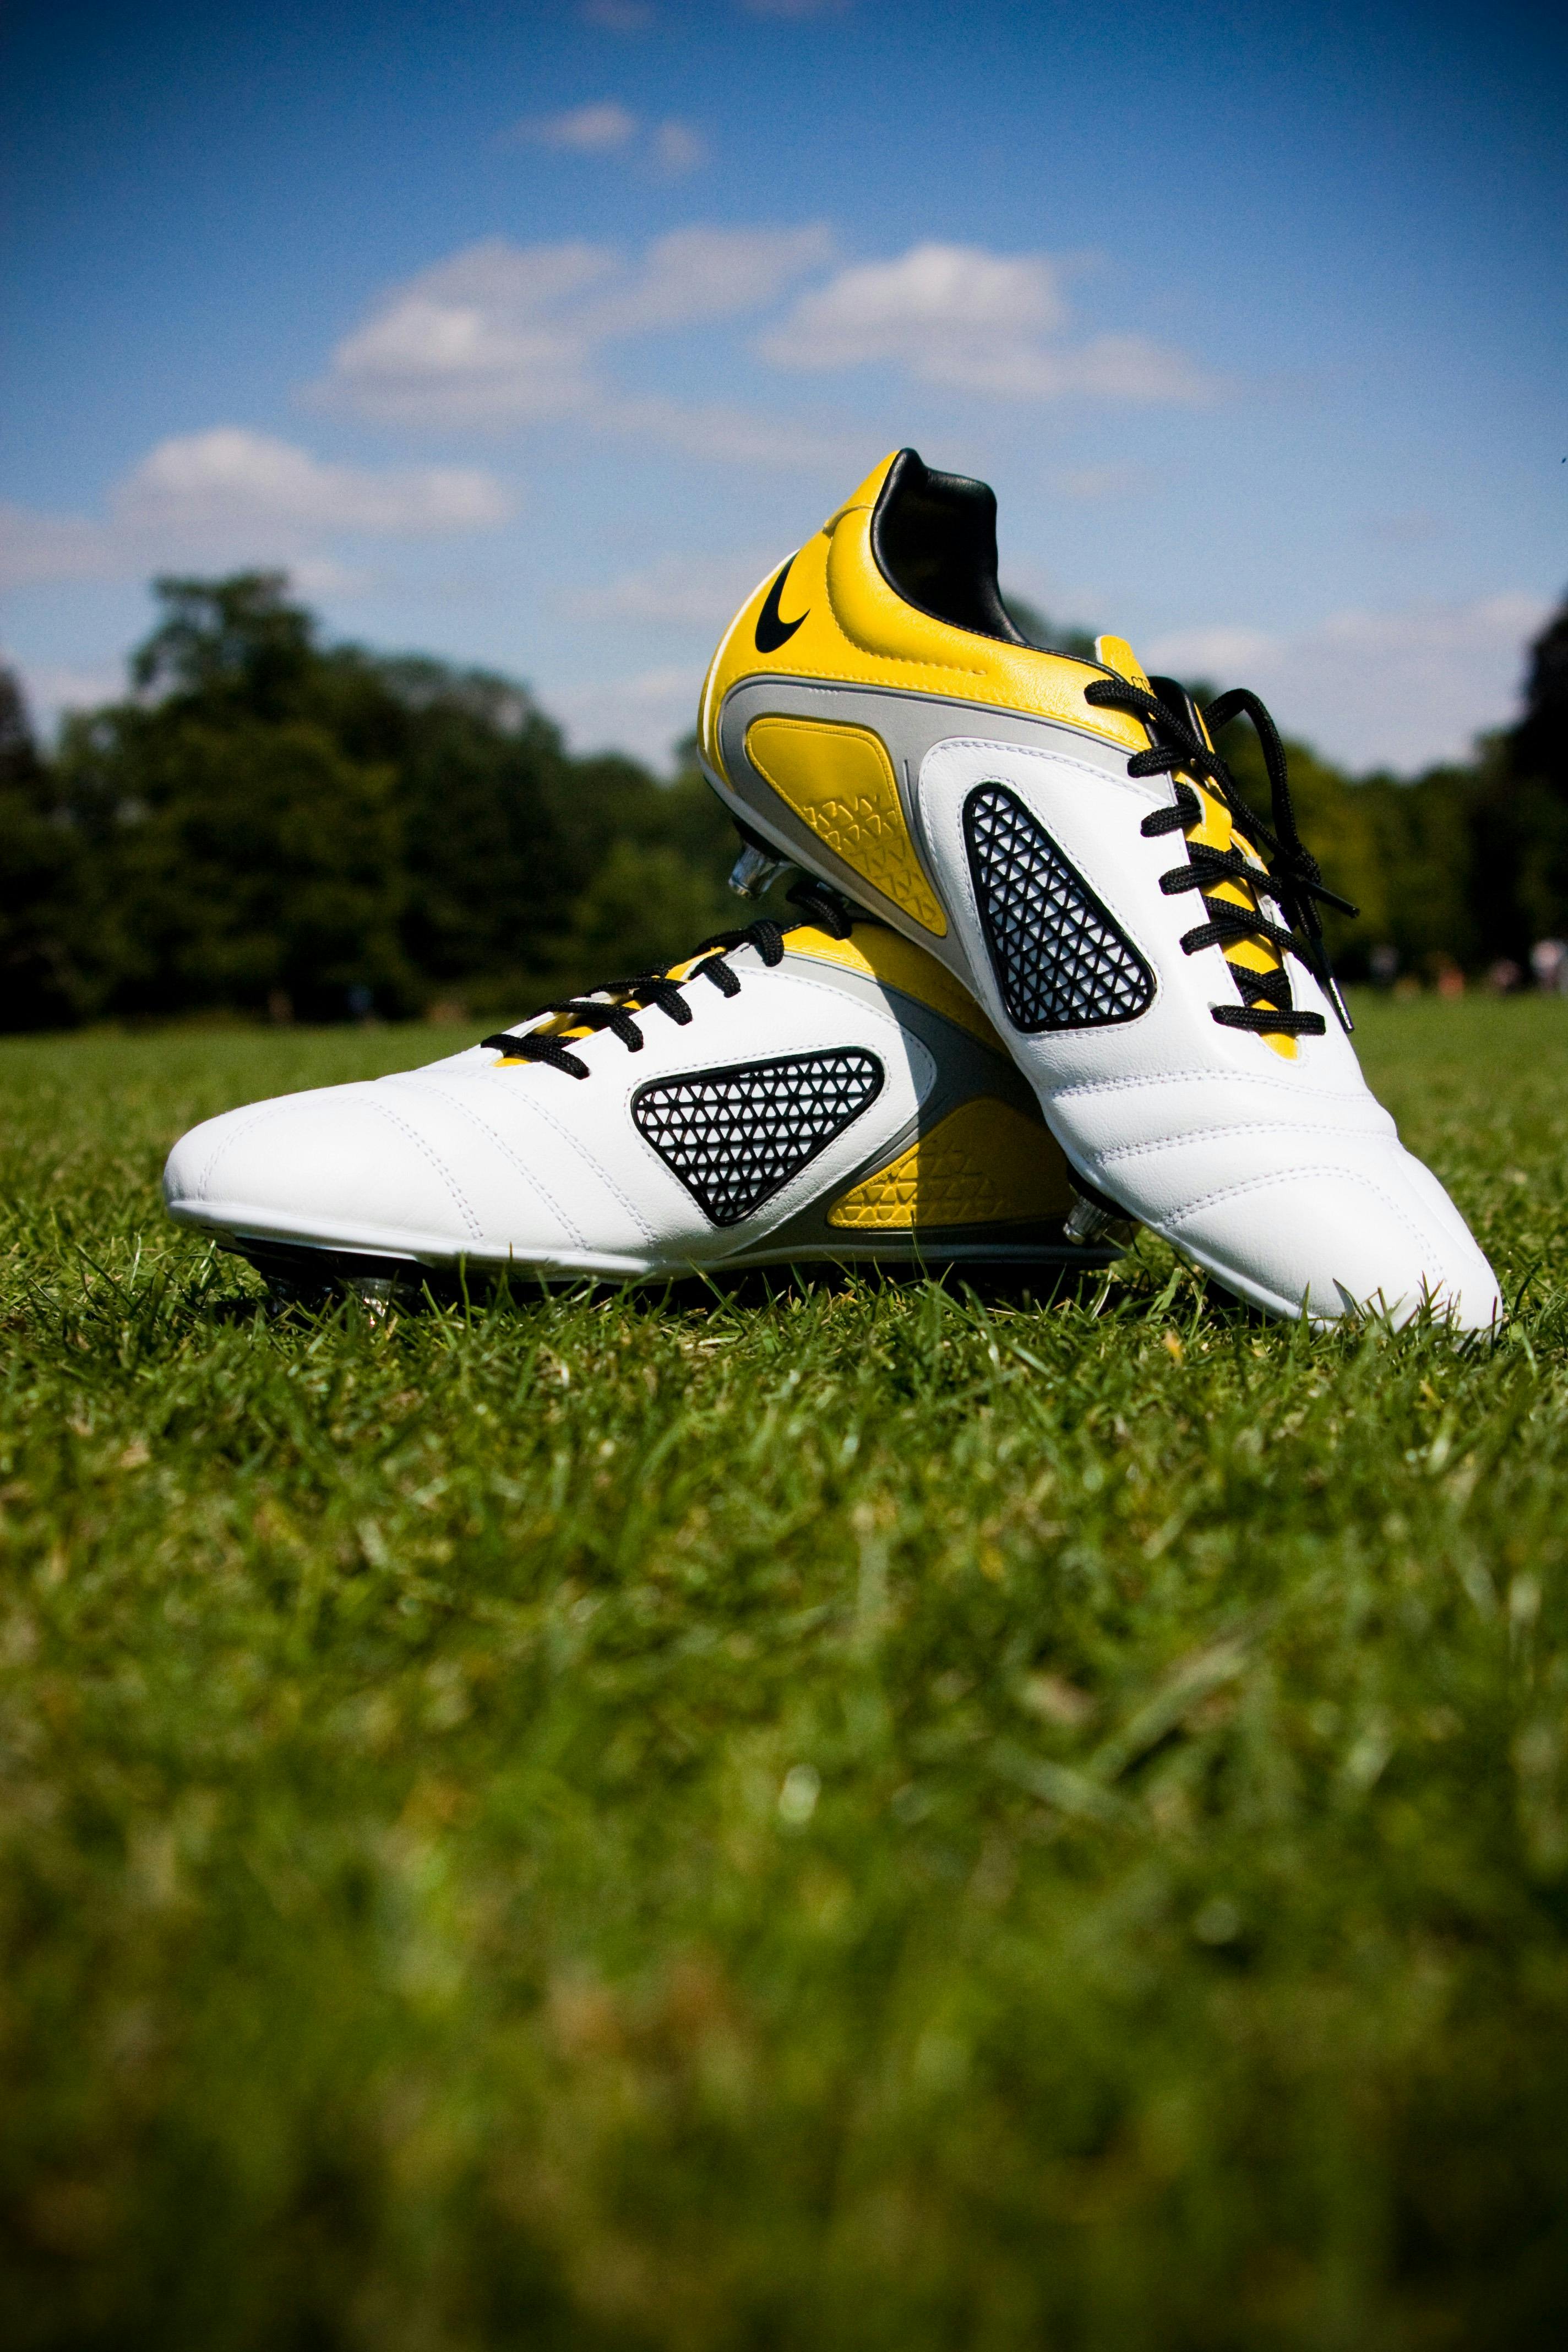 Pair of White-and-yellow Nike Cleats